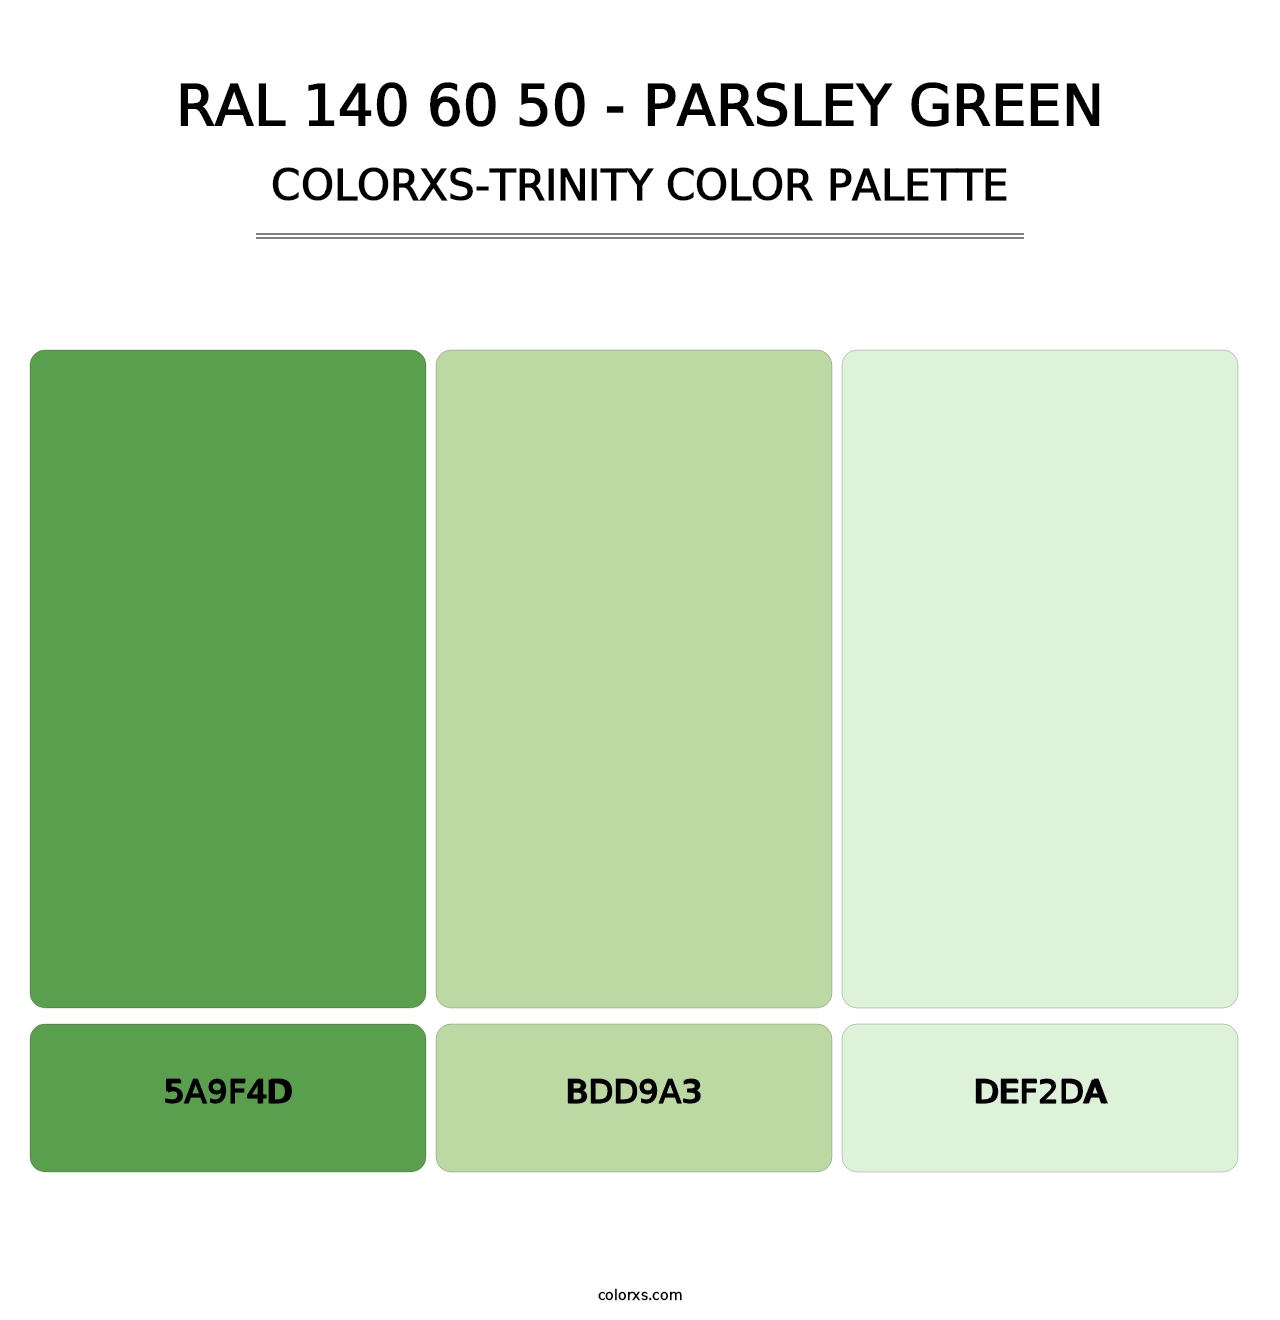 RAL 140 60 50 - Parsley Green - Colorxs Trinity Palette